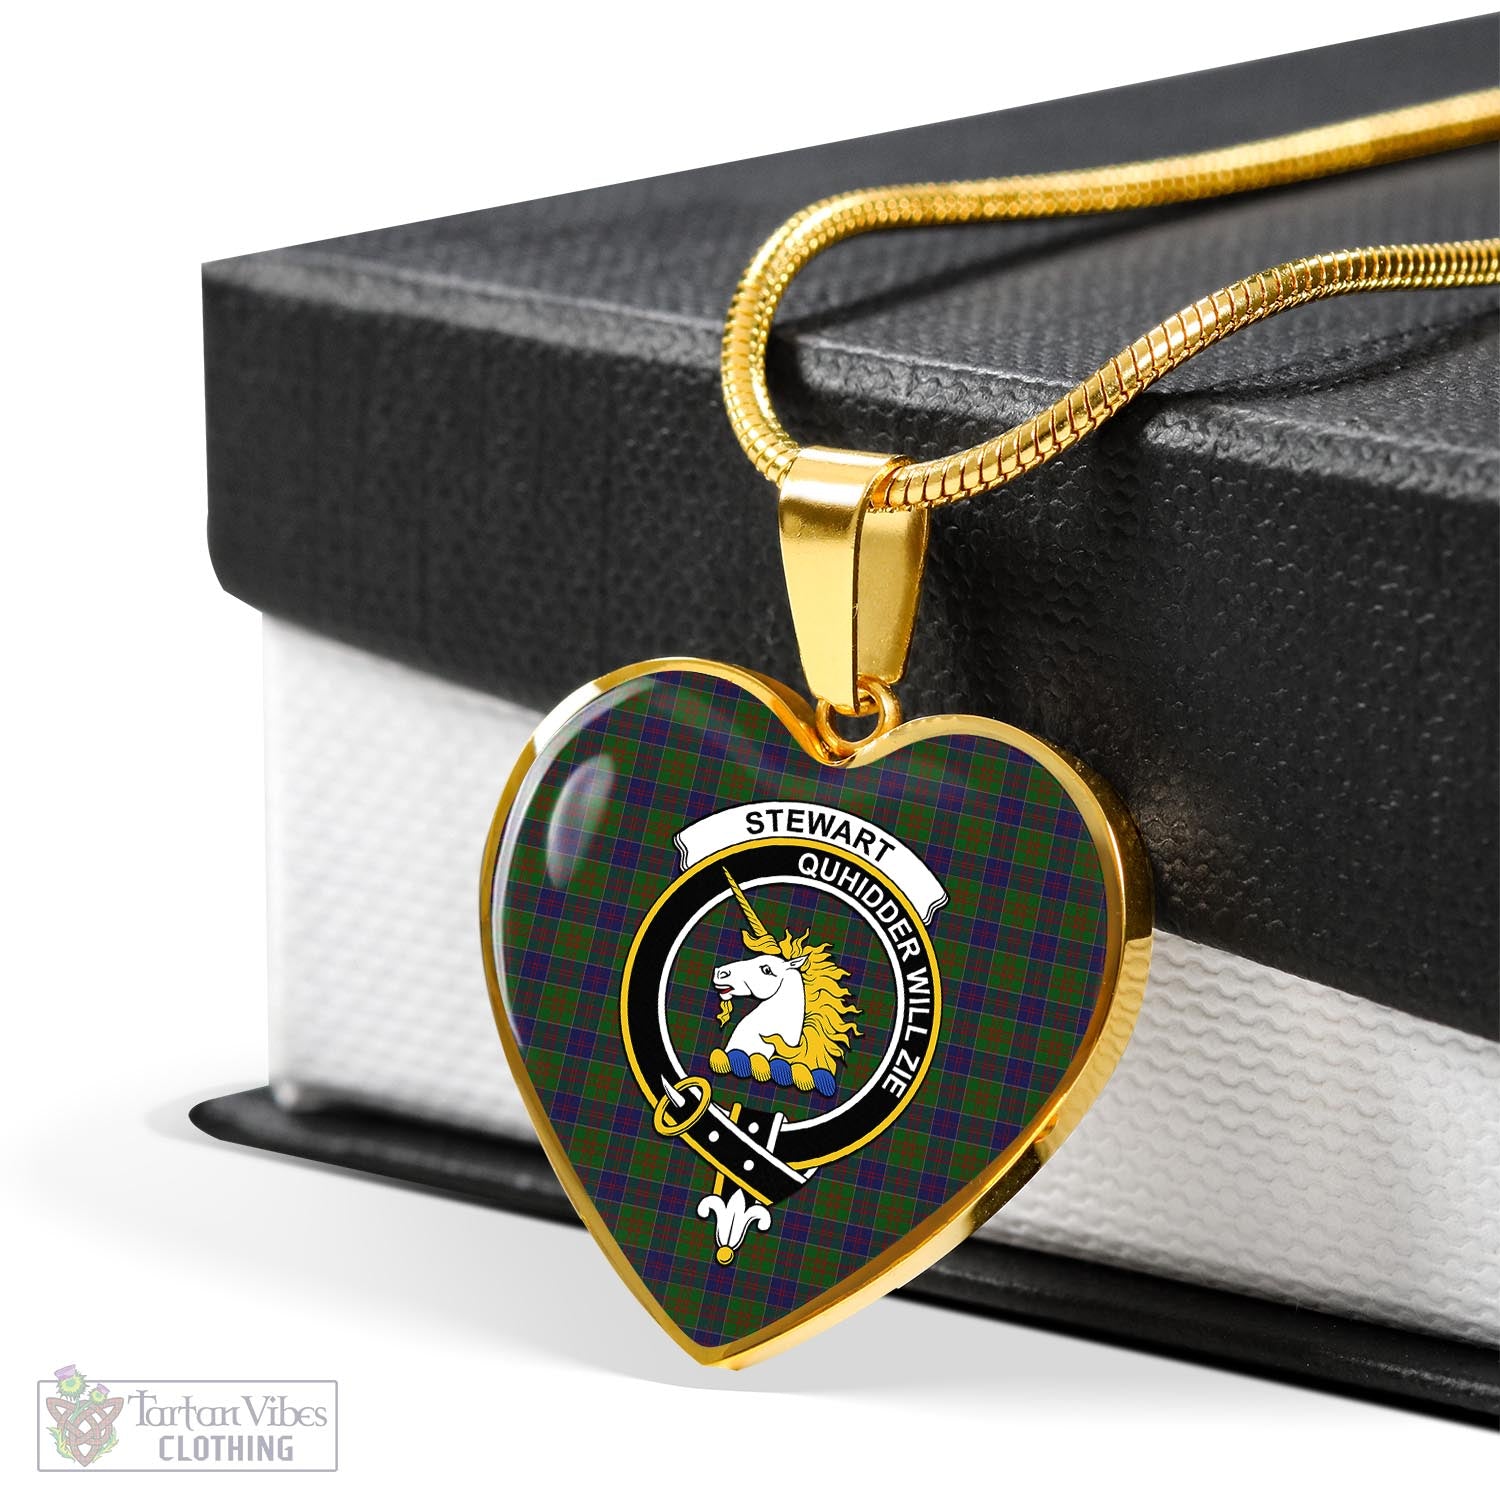 Tartan Vibes Clothing Stewart of Appin Hunting Tartan Heart Necklace with Family Crest